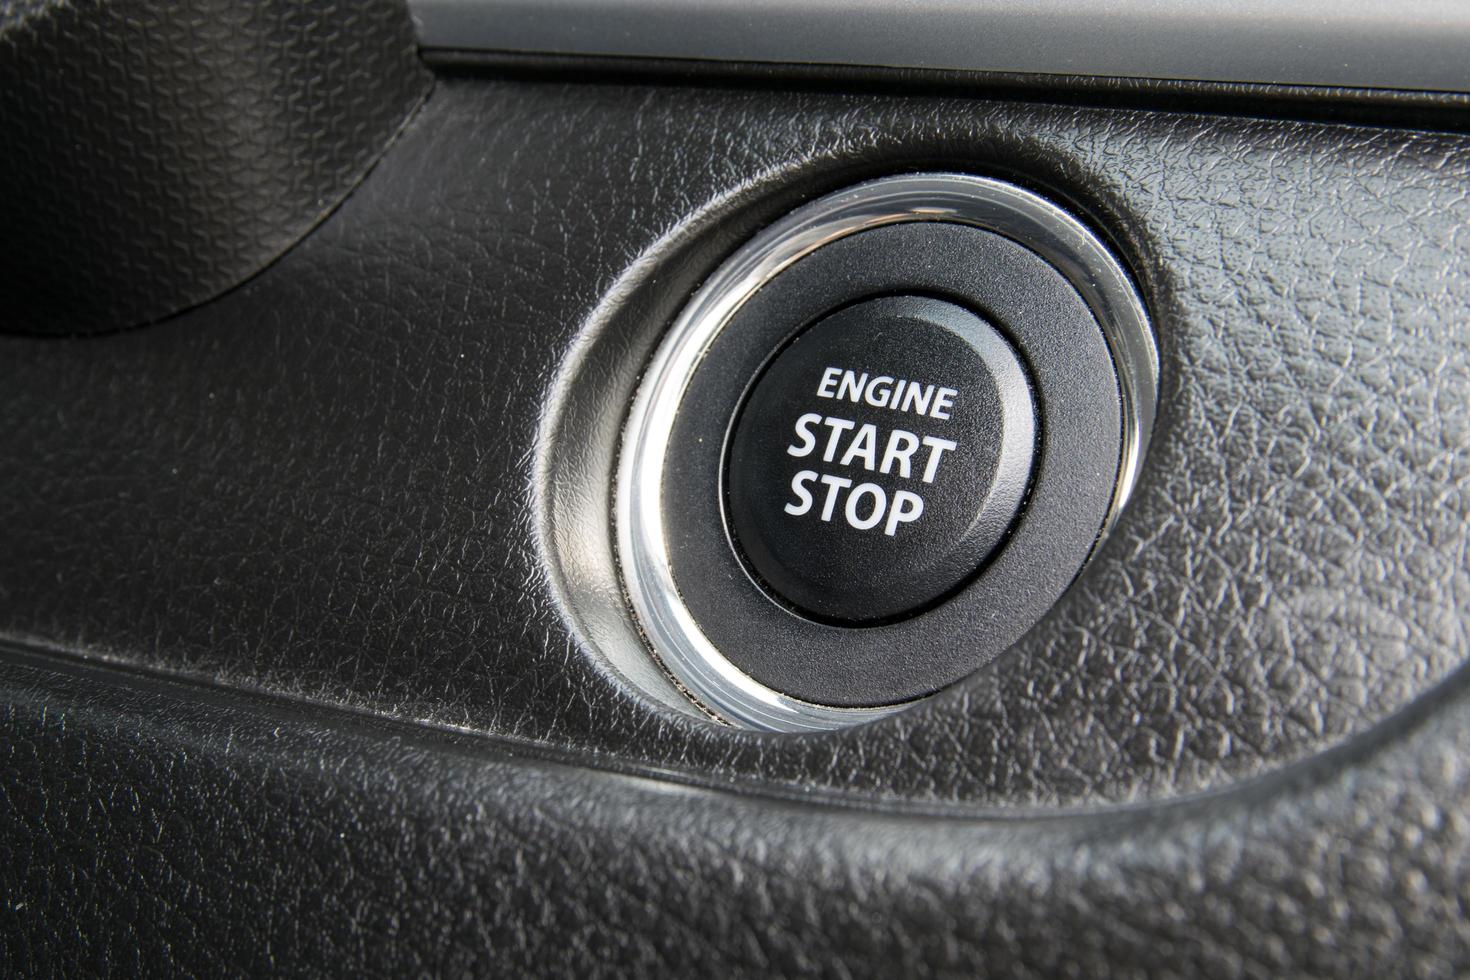 Engine start stop button from a modern car interior photo